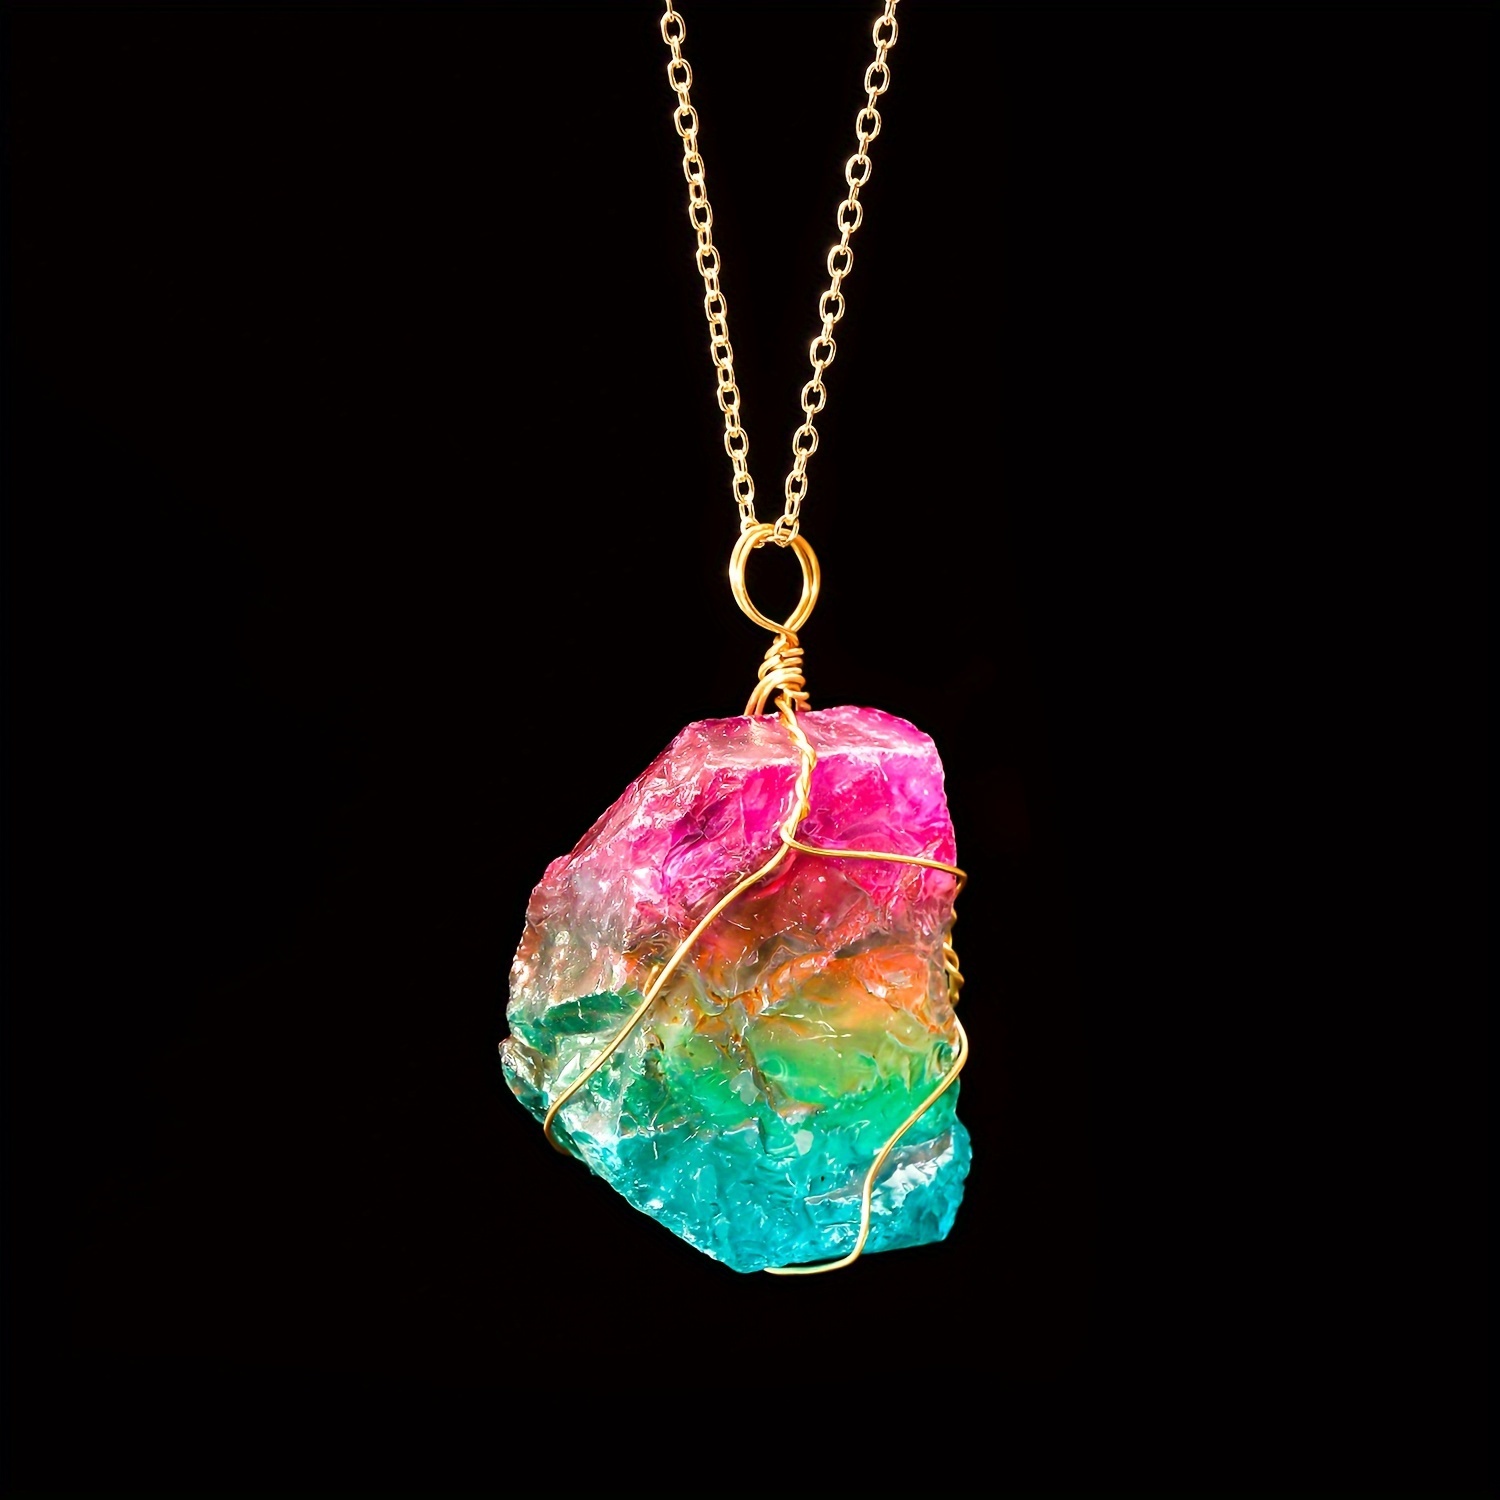 Rainbow Stone Natural Crystal Rock Necklace Gold Plated Quartz Pendant